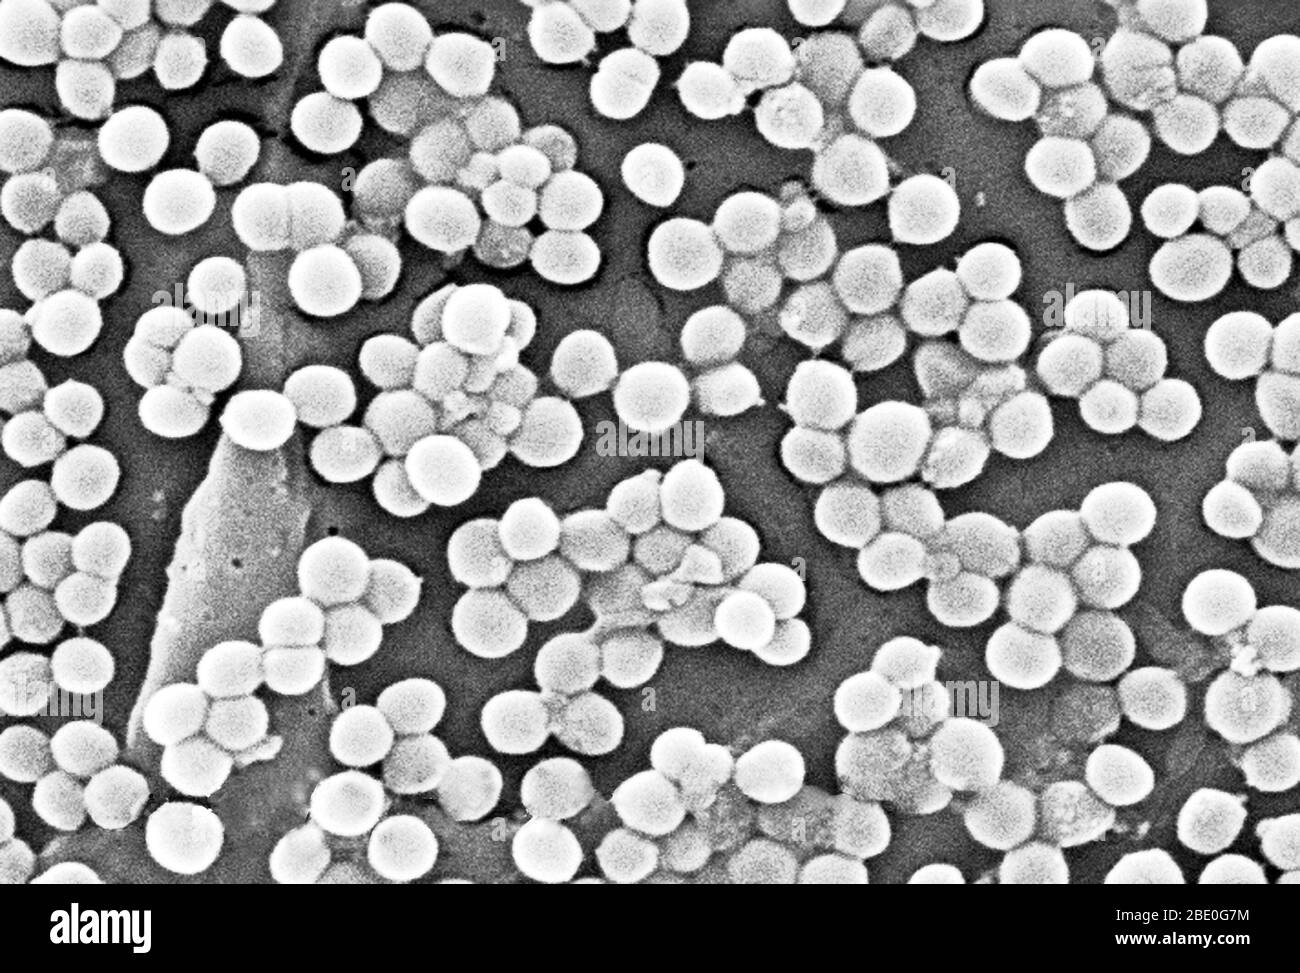 Numerous clumps of methicillin-resistant Staphylococcus aureus bacteria, commonly referred to by the acronym MRSA. Recently recognized outbreaks or clusters of MRSA in community settings have been associated with strains that have some unique microbiologic and genetic properties compared to the traditional hospital-based MRSA strains. This suggests that some biologic properties, e.g., virulence factors like toxins, may allow the community strains to spread more easily or cause more skin disease. A common strain named USA300-0114 has caused many such outbreaks in the United States. Staphylococc Stock Photo